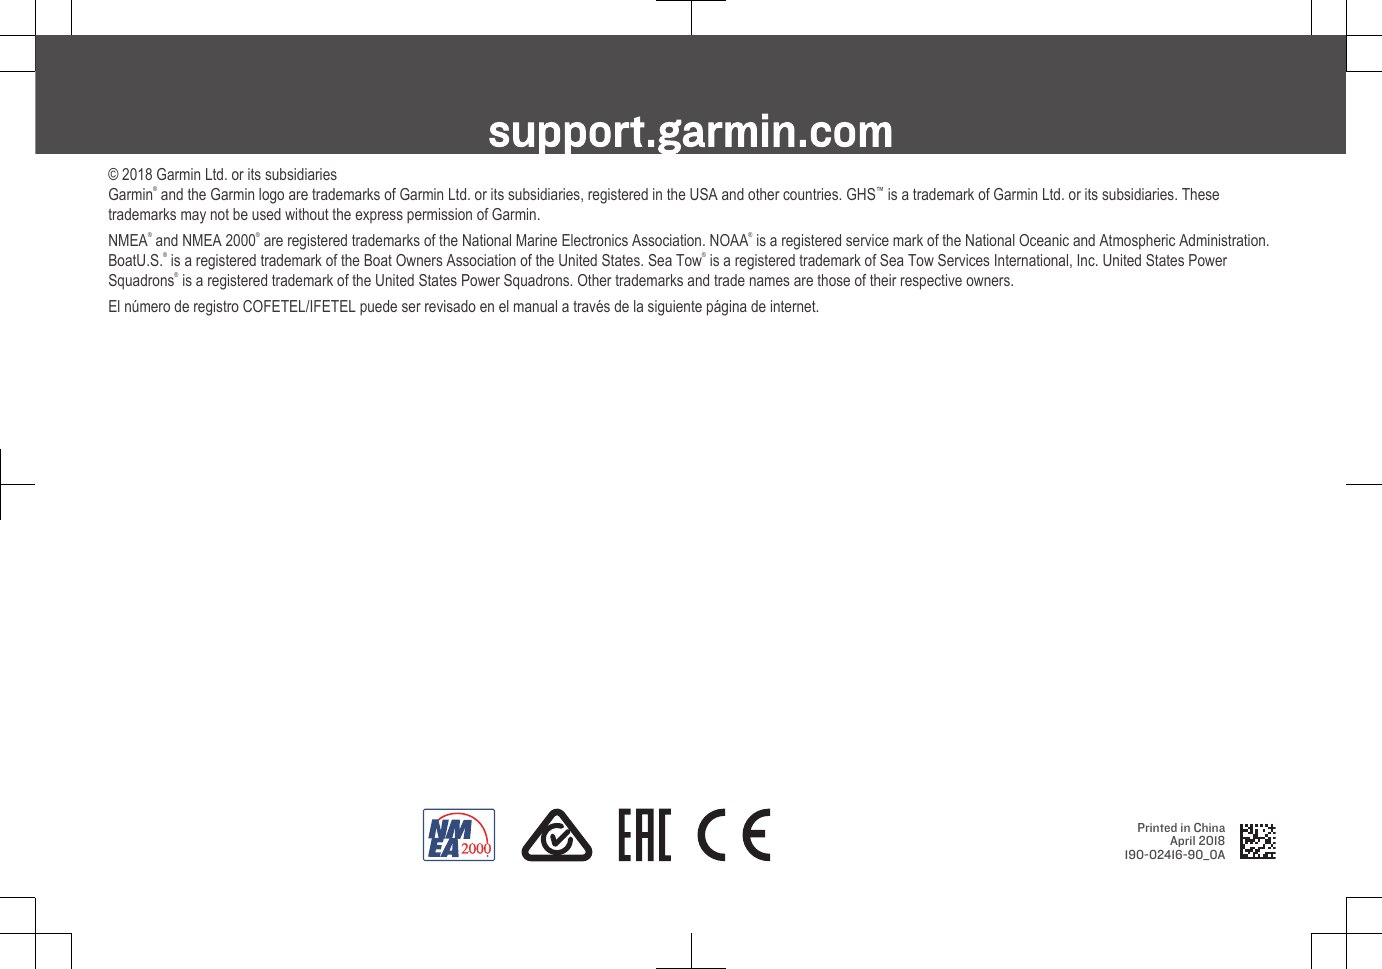 support.garmin.com© 2018 Garmin Ltd. or its subsidiariesGarmin® and the Garmin logo are trademarks of Garmin Ltd. or its subsidiaries, registered in the USA and other countries. GHS™ is a trademark of Garmin Ltd. or its subsidiaries. Thesetrademarks may not be used without the express permission of Garmin.NMEA® and NMEA 2000® are registered trademarks of the National Marine Electronics Association. NOAA® is a registered service mark of the National Oceanic and Atmospheric Administration.BoatU.S.® is a registered trademark of the Boat Owners Association of the United States. Sea Tow® is a registered trademark of Sea Tow Services International, Inc. United States PowerSquadrons® is a registered trademark of the United States Power Squadrons. Other trademarks and trade names are those of their respective owners.El número de registro COFETEL/IFETEL puede ser revisado en el manual a través de la siguiente página de internet.Printed in ChinaApril 2018190-02416-90_0A